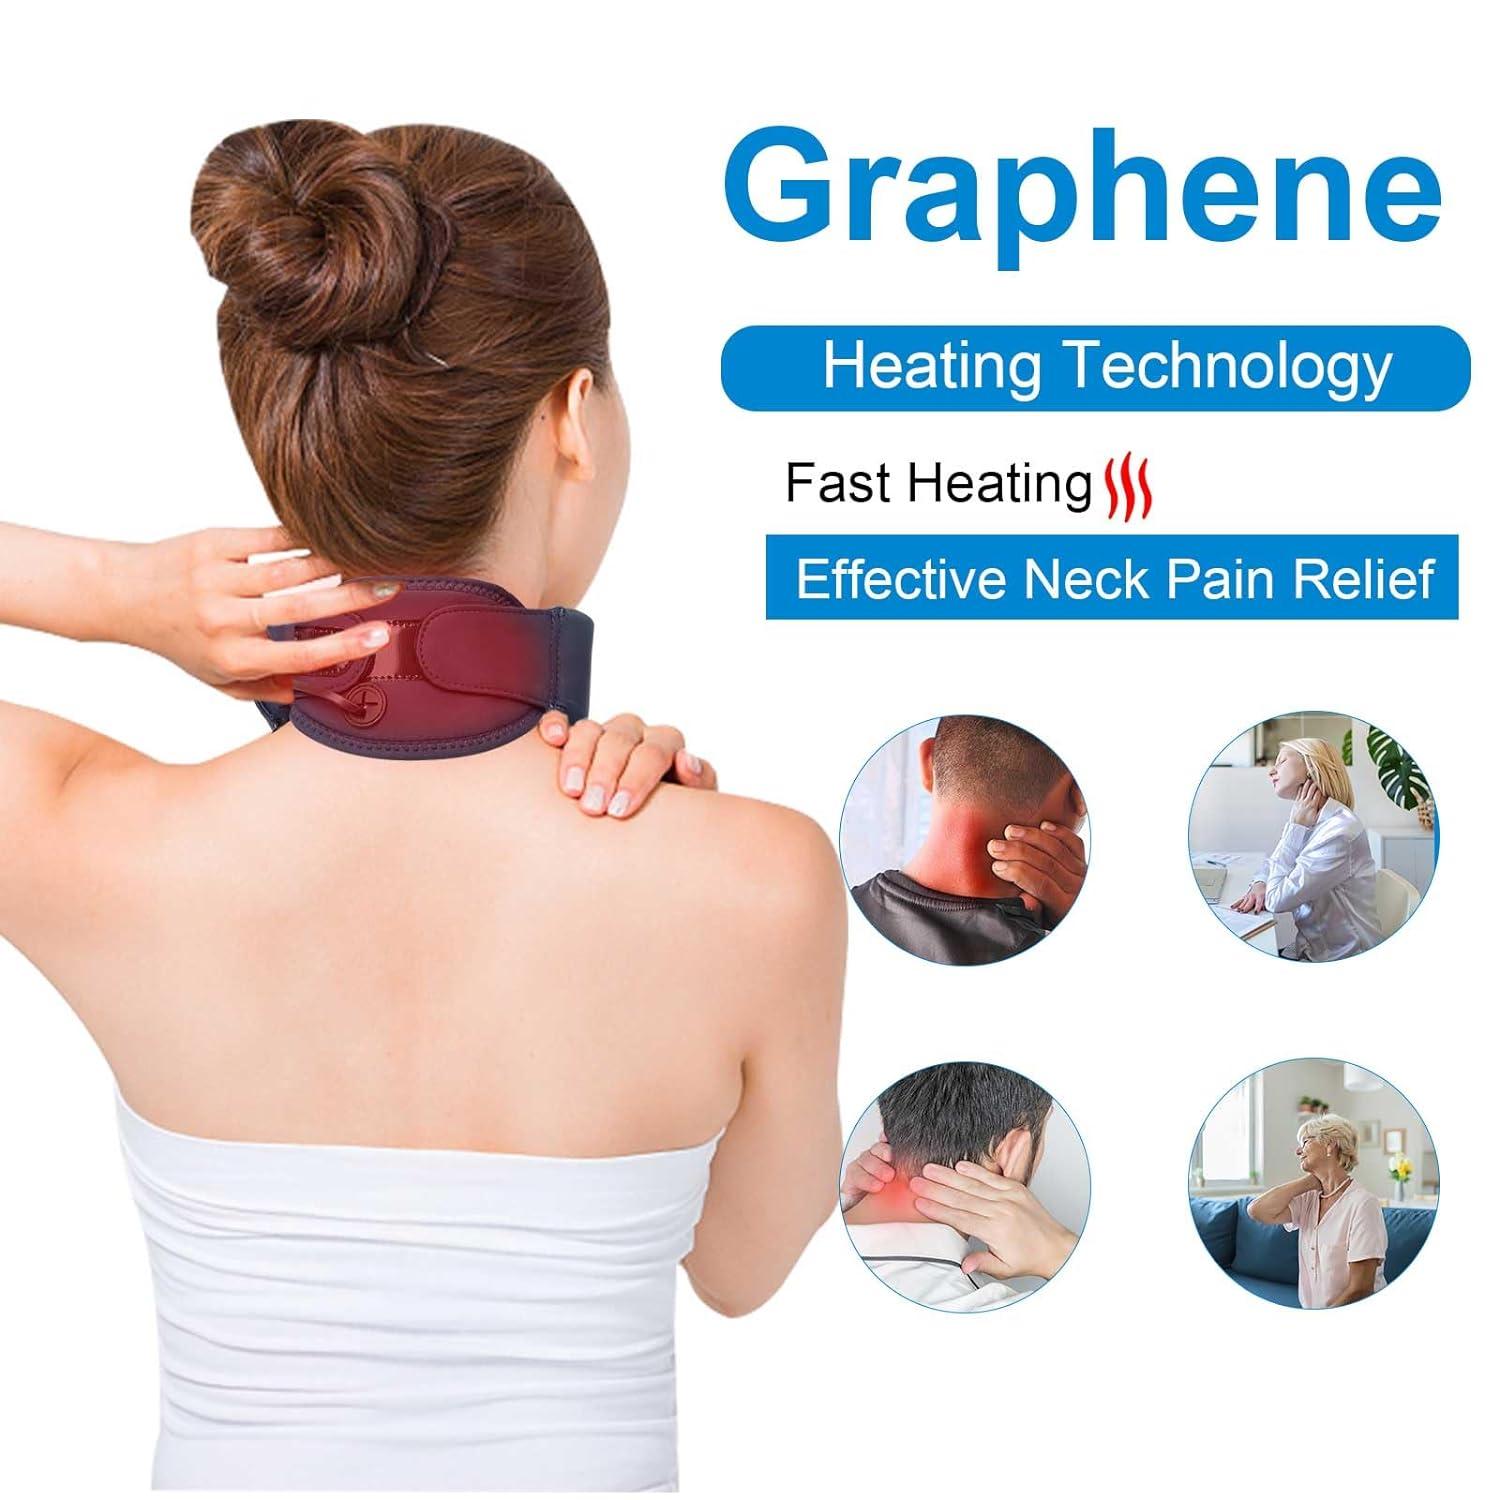 Neck Brace for Neck Pain and Support - Soft Foam Cervical Collar